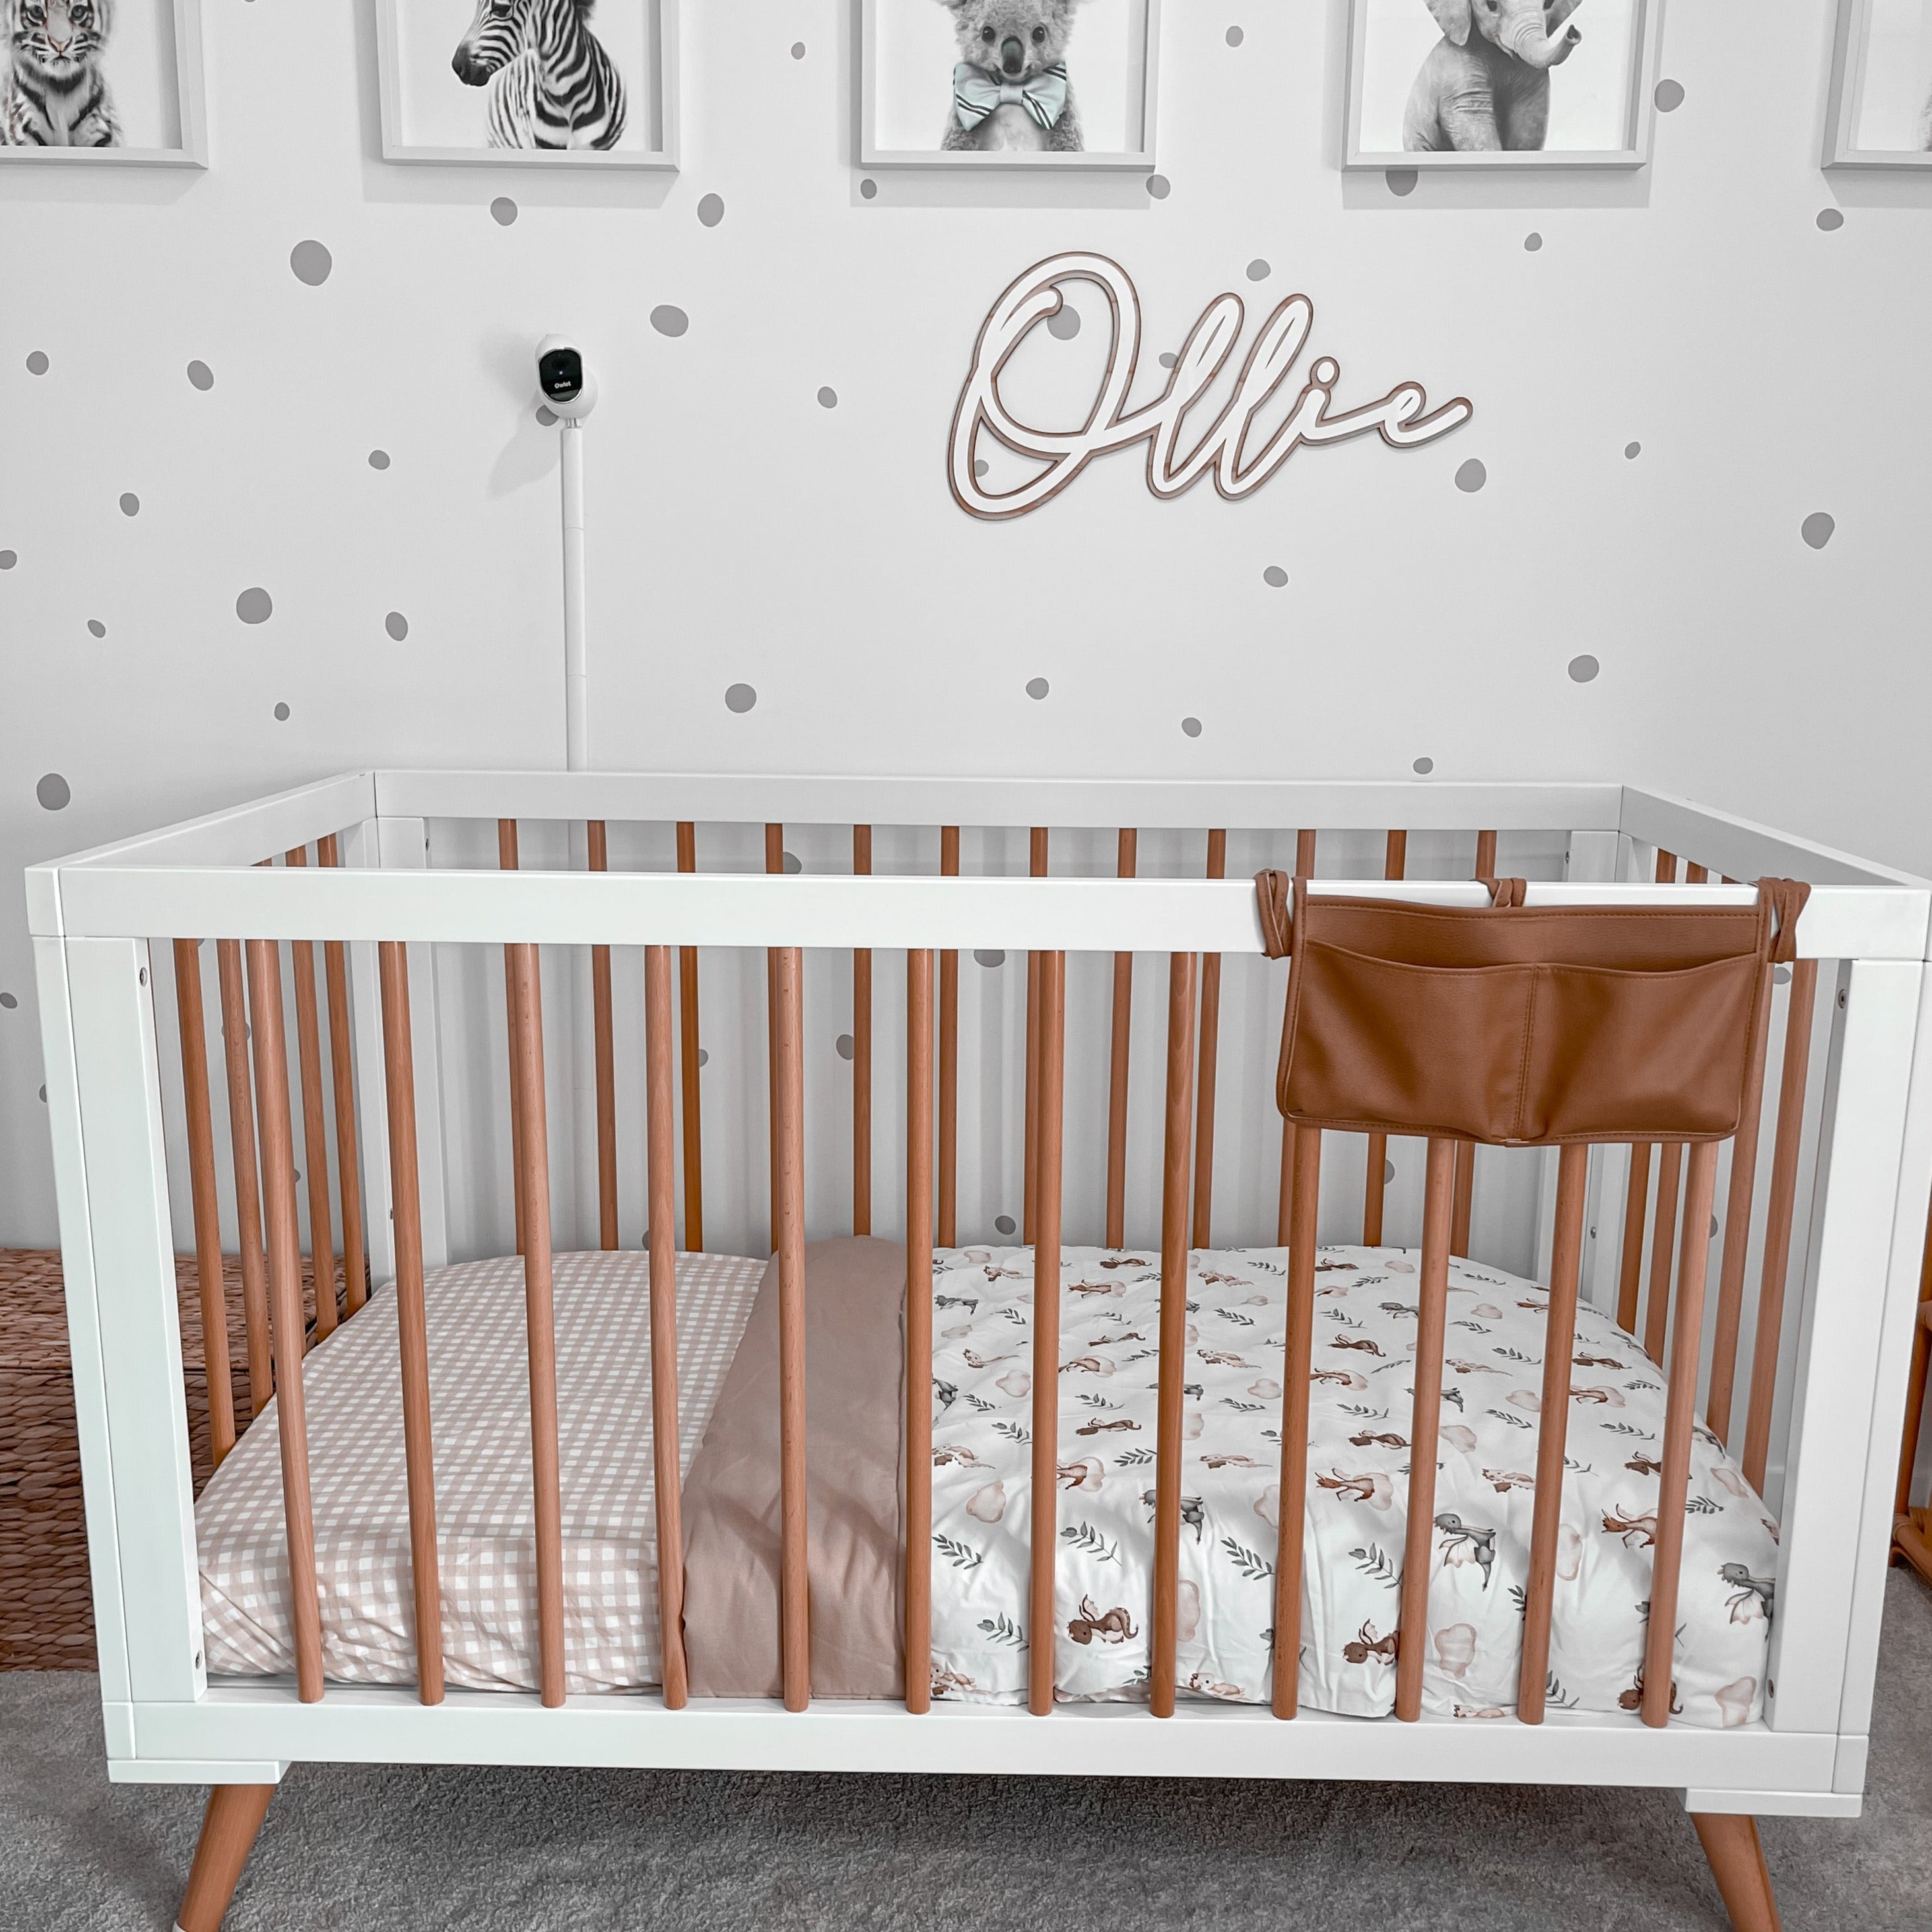 Pine crib with white accents set out in a nursery with Ollie written on the wall and cotton linen on the mattress.